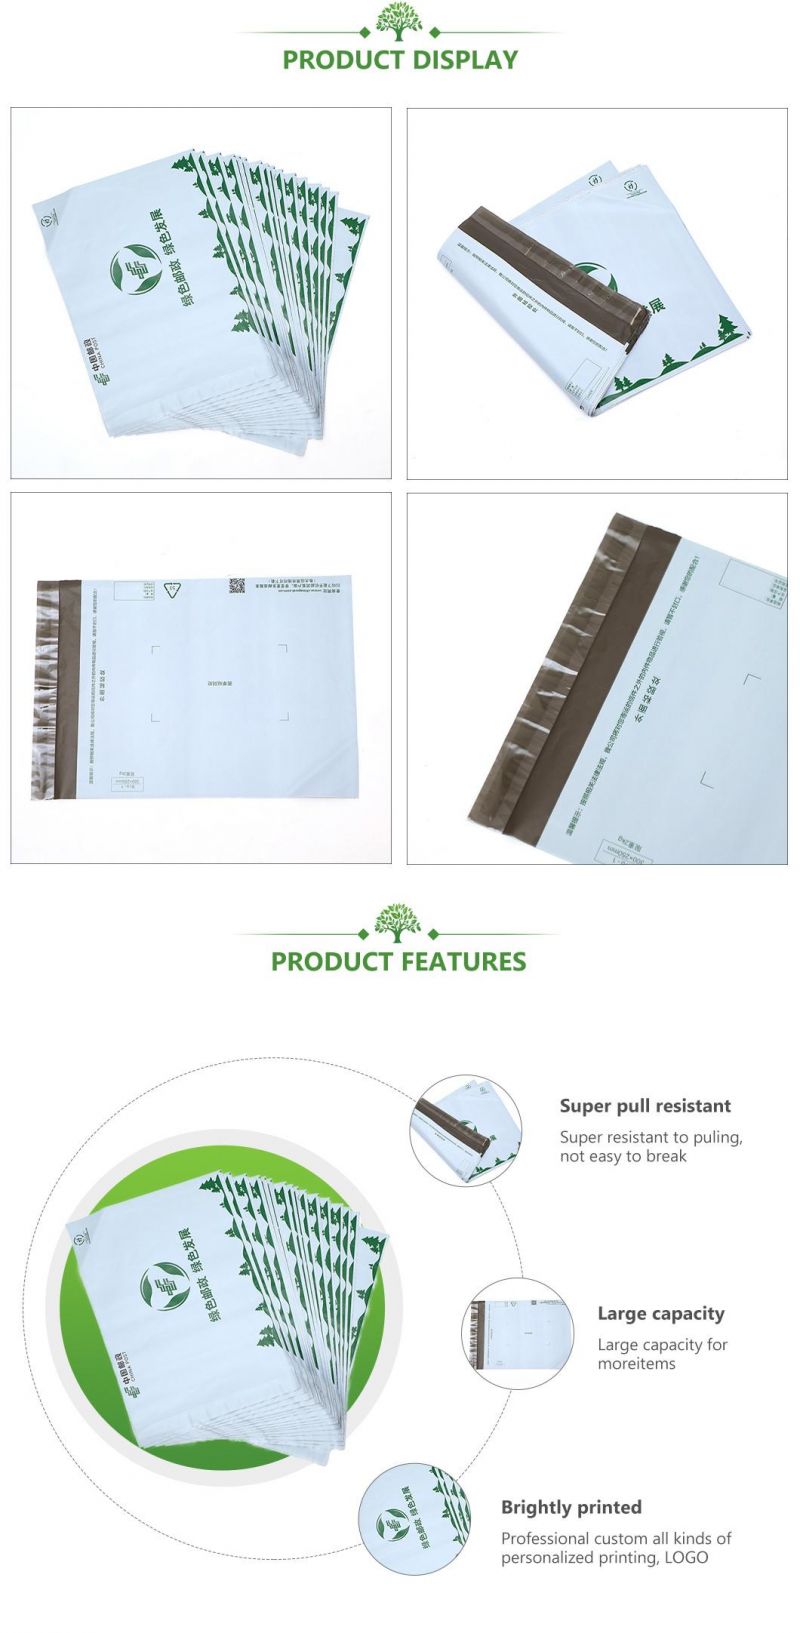 Biodegradable and Compostable Delivery Bags,Courier Bags Manufacturer with FDA, Brc, BSCI, CE, Grs,Bpi,Seeding,Ok Compost Home, Ok Compost Industrial,Seeding CE